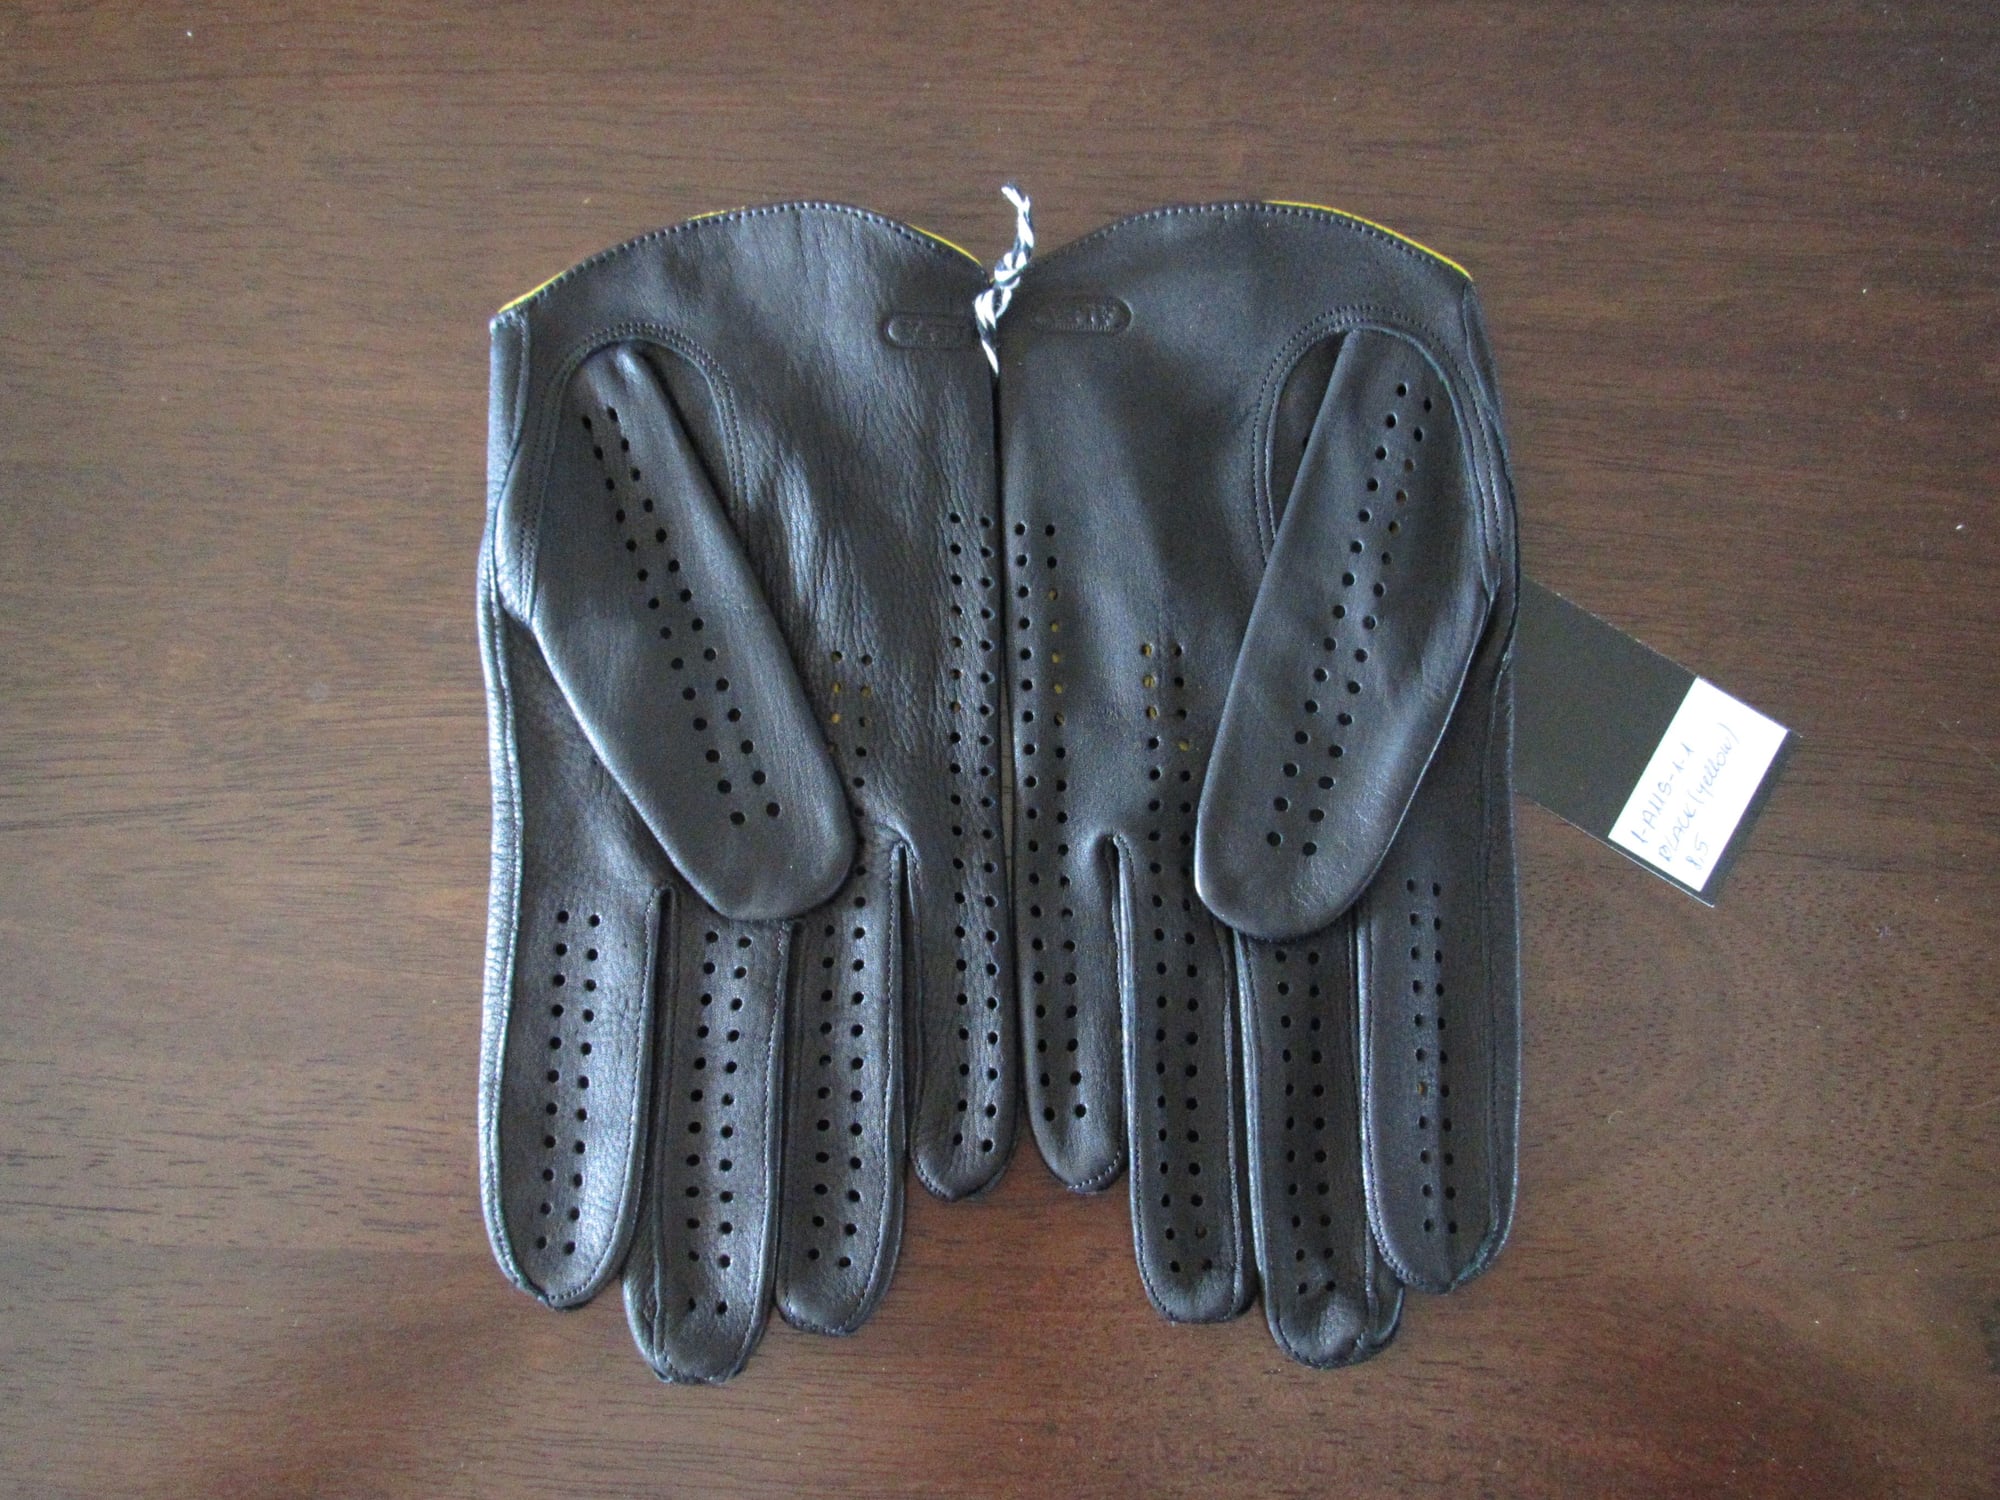 Accessories - Deerskin Driving Gloves (Black with Yellow) - New - All Years Any Make All Models - Palm Coast, FL 32137, United States